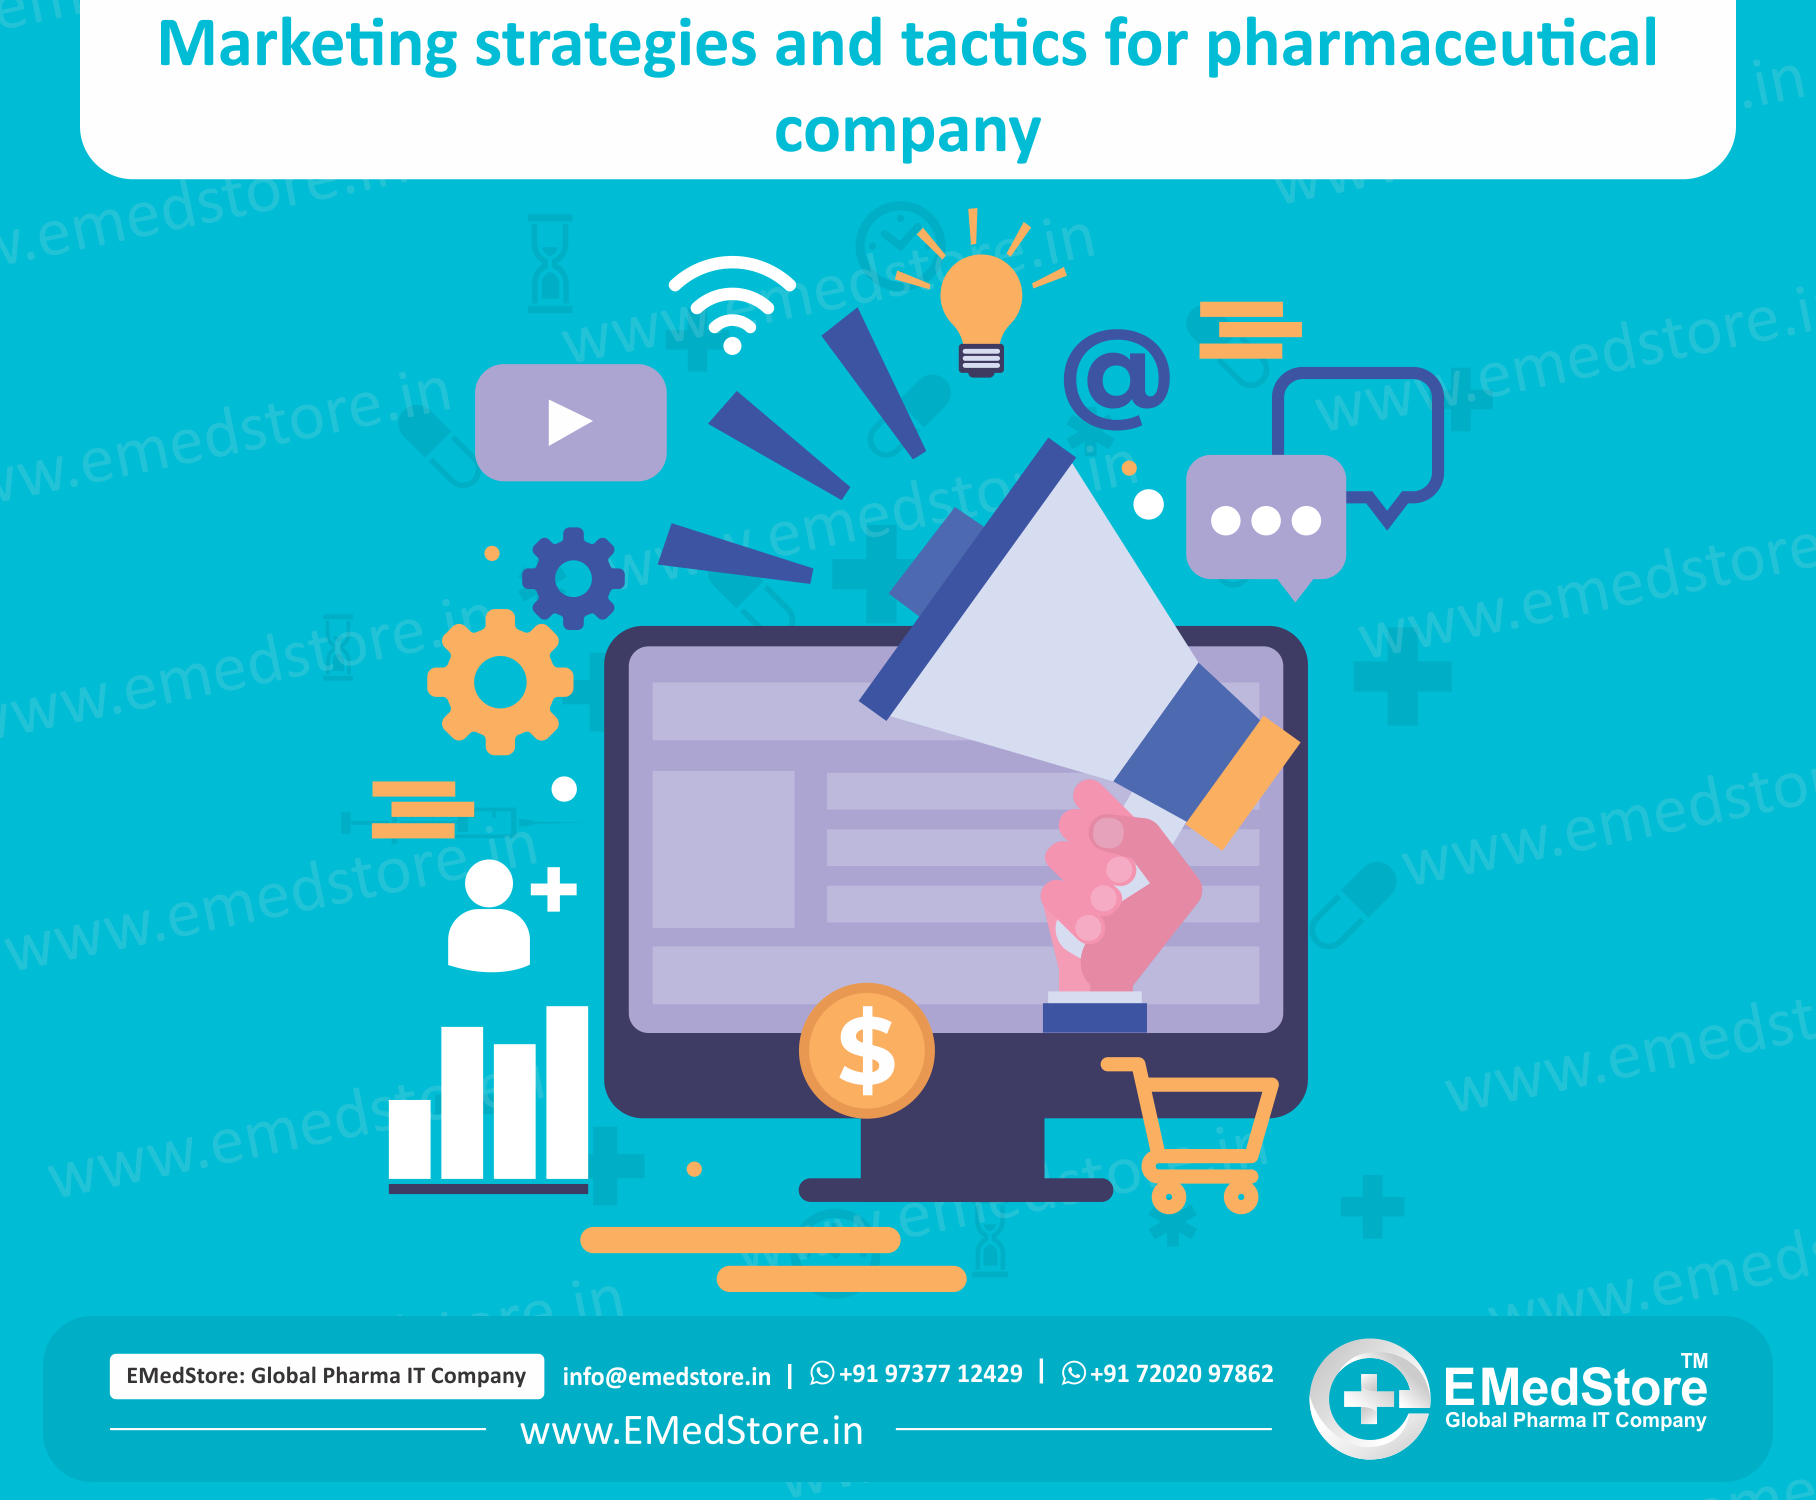 Marketing strategies and tactics for pharmaceutical company